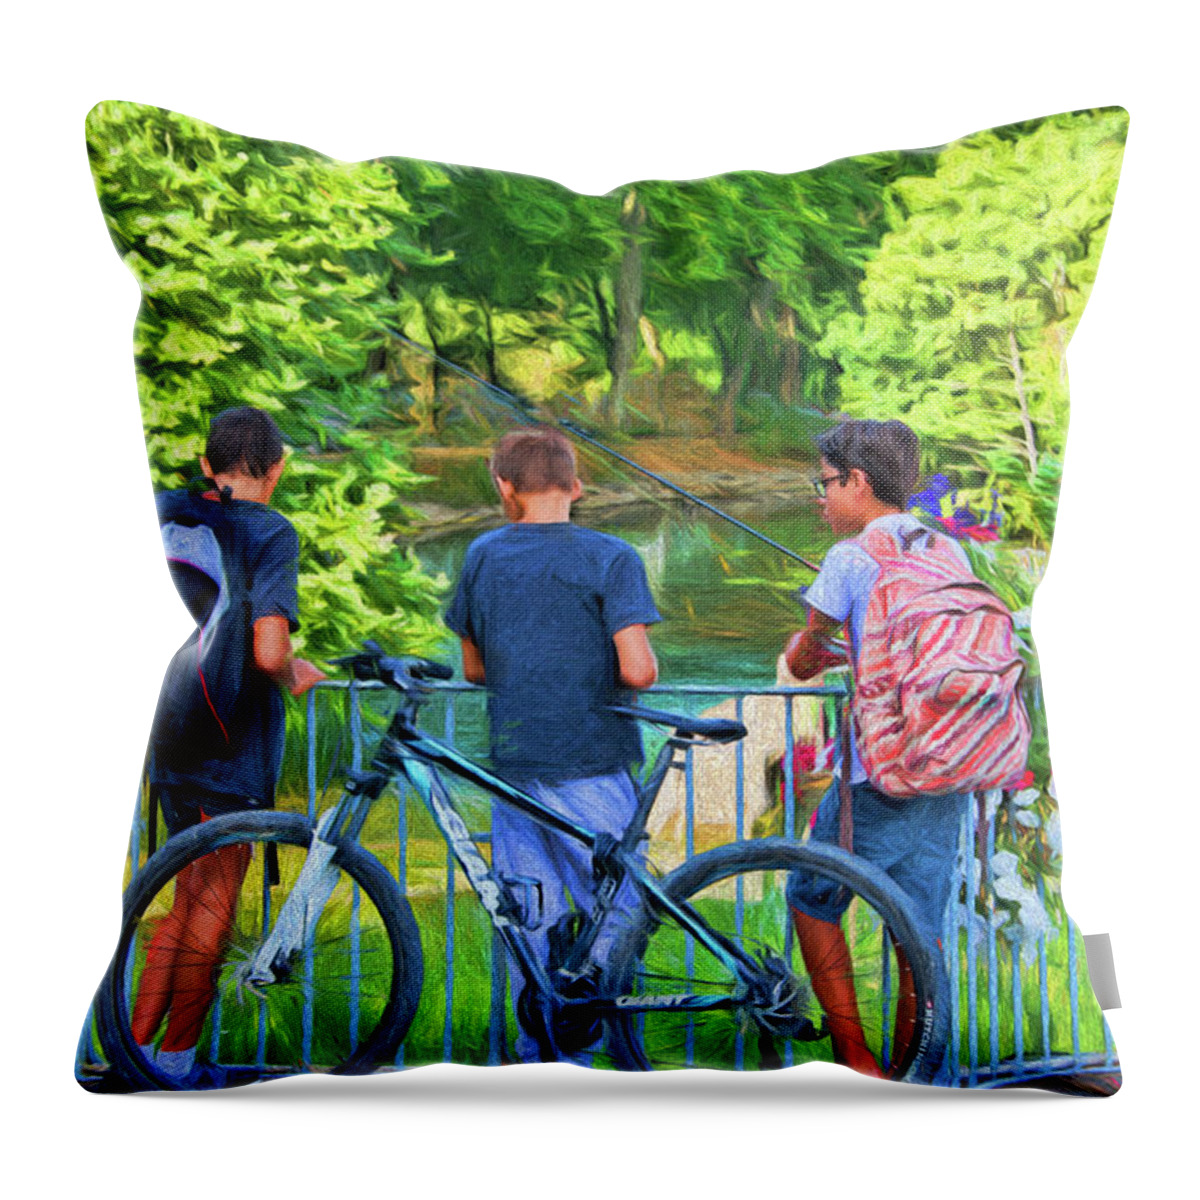 Fishing Friends Throw Pillow featuring the photograph Fishing Friends, Azay le Rideau, Loire Valley, France by Curt Rush